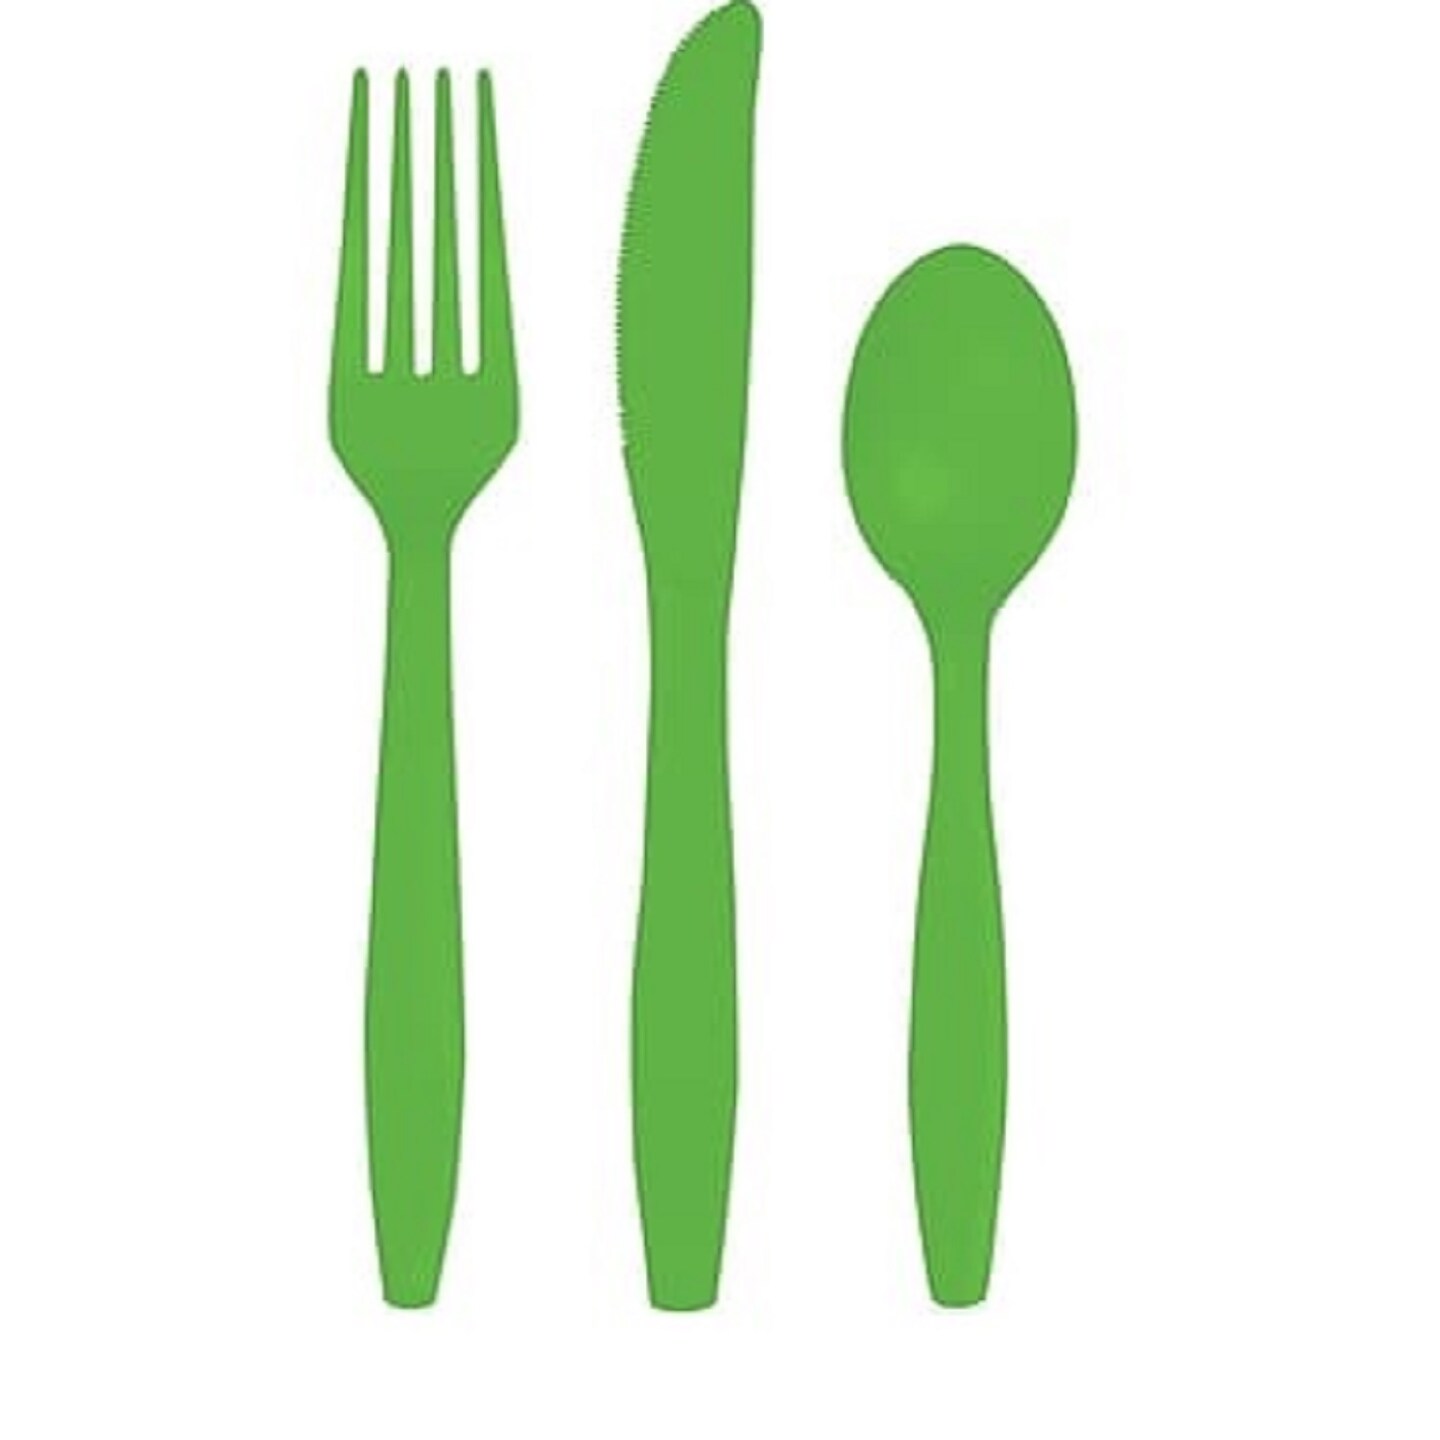 Party Central Club Pack of 216 Lime Green Heavy-Duty Plastic Party Knives, Forks and Spoons